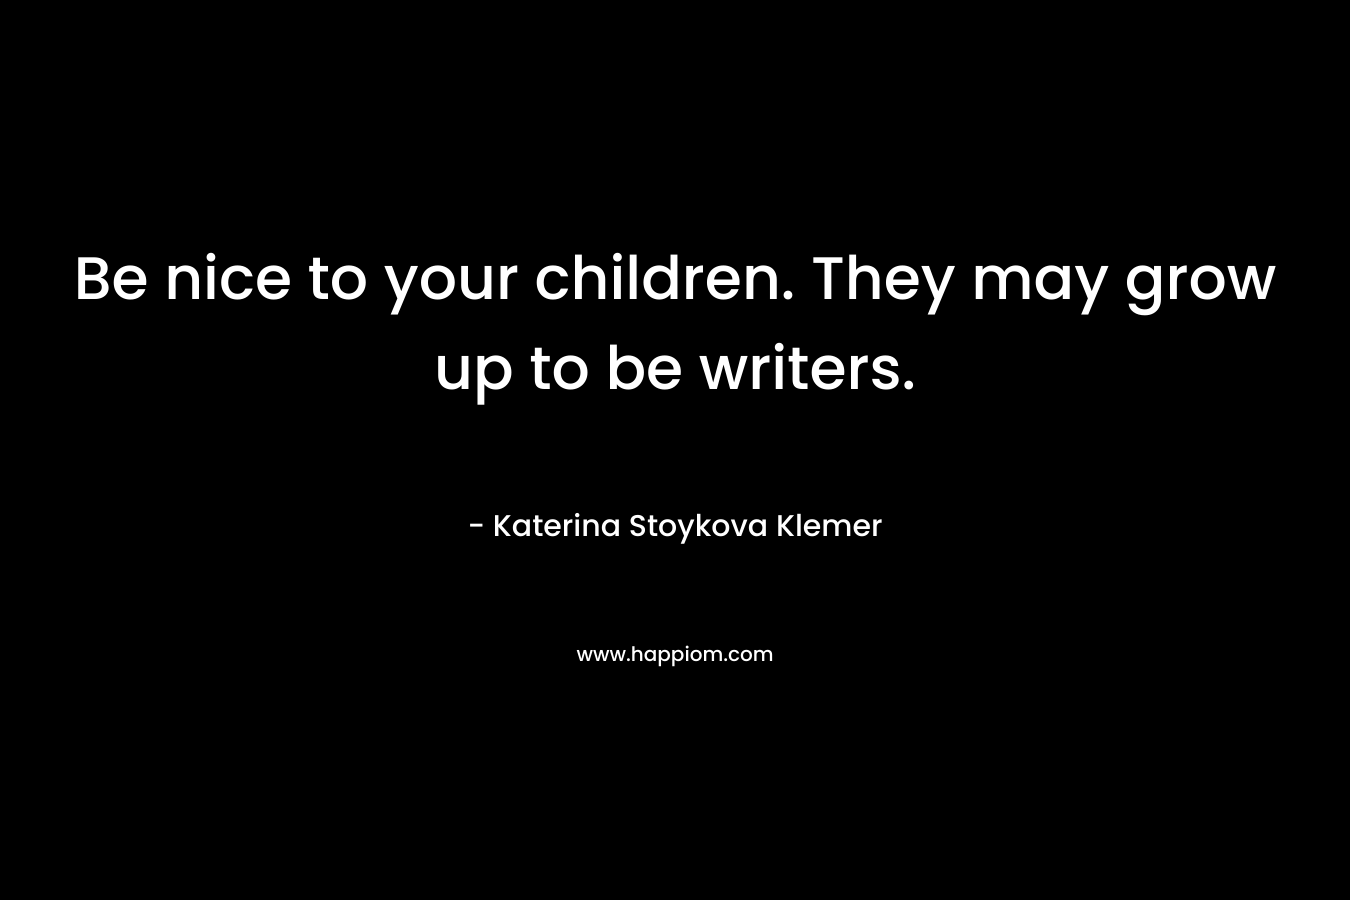 Be nice to your children. They may grow up to be writers.